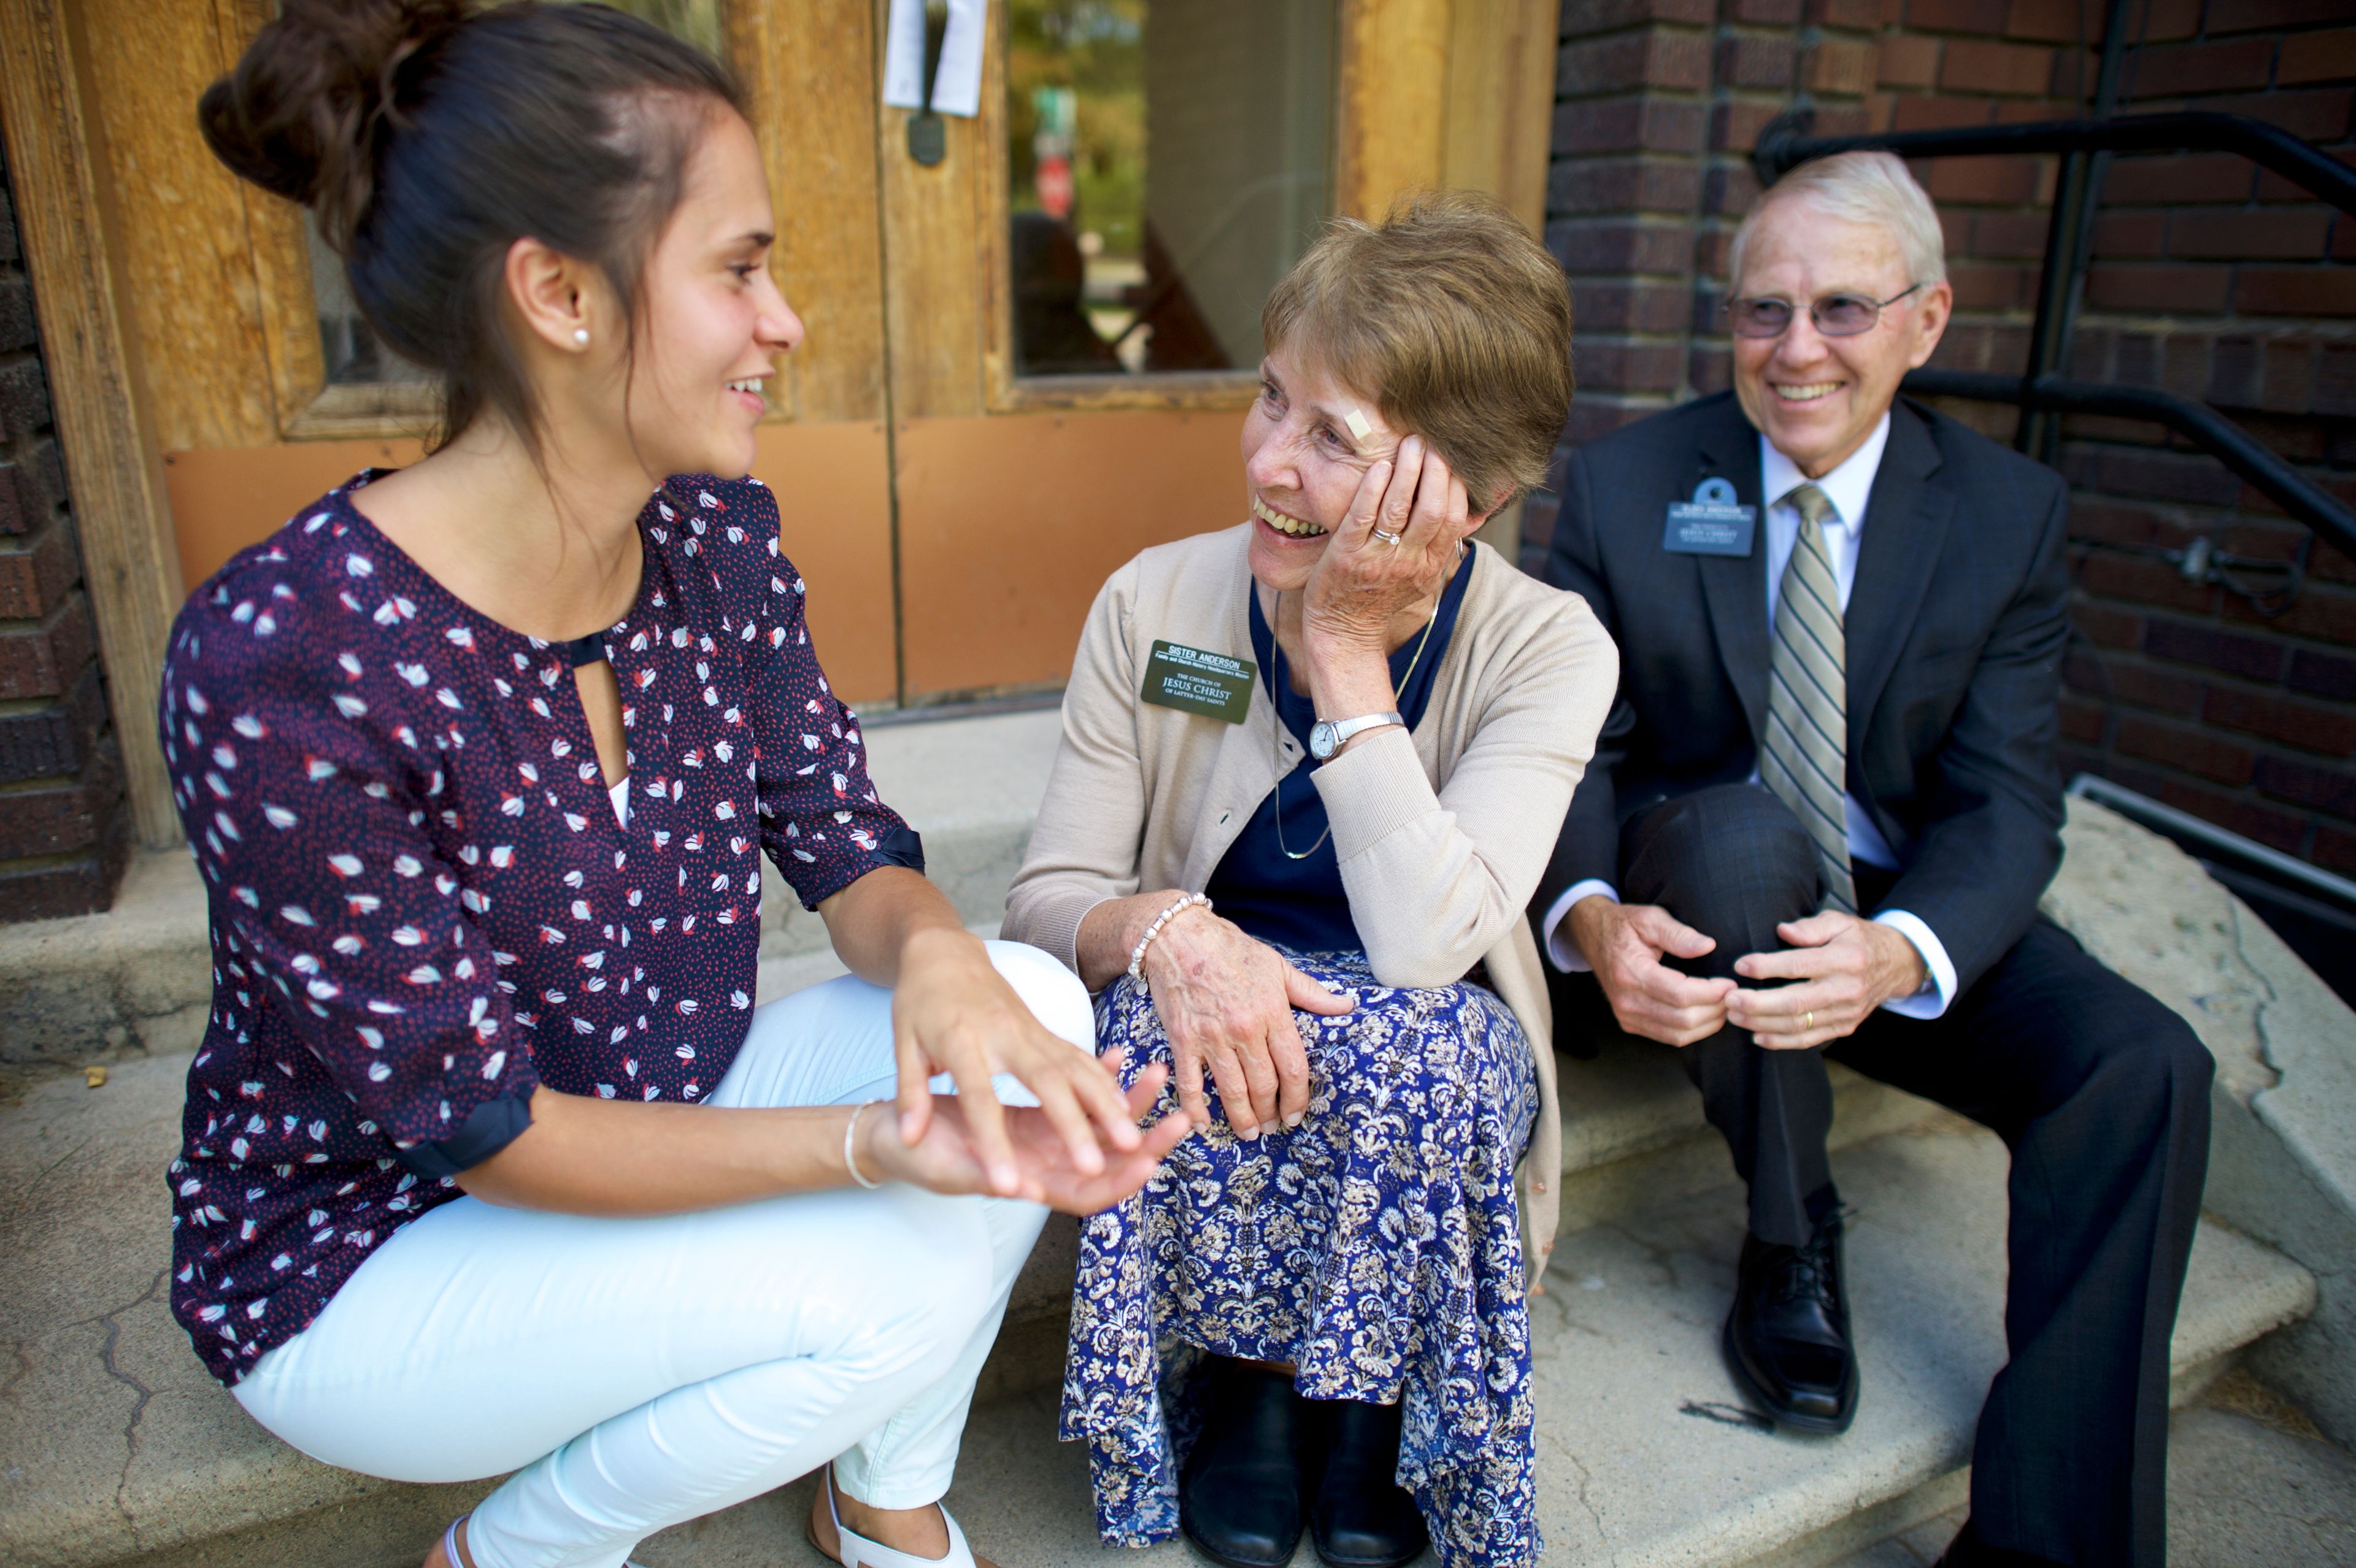 A senior missionary couple sitting and talking with a woman.